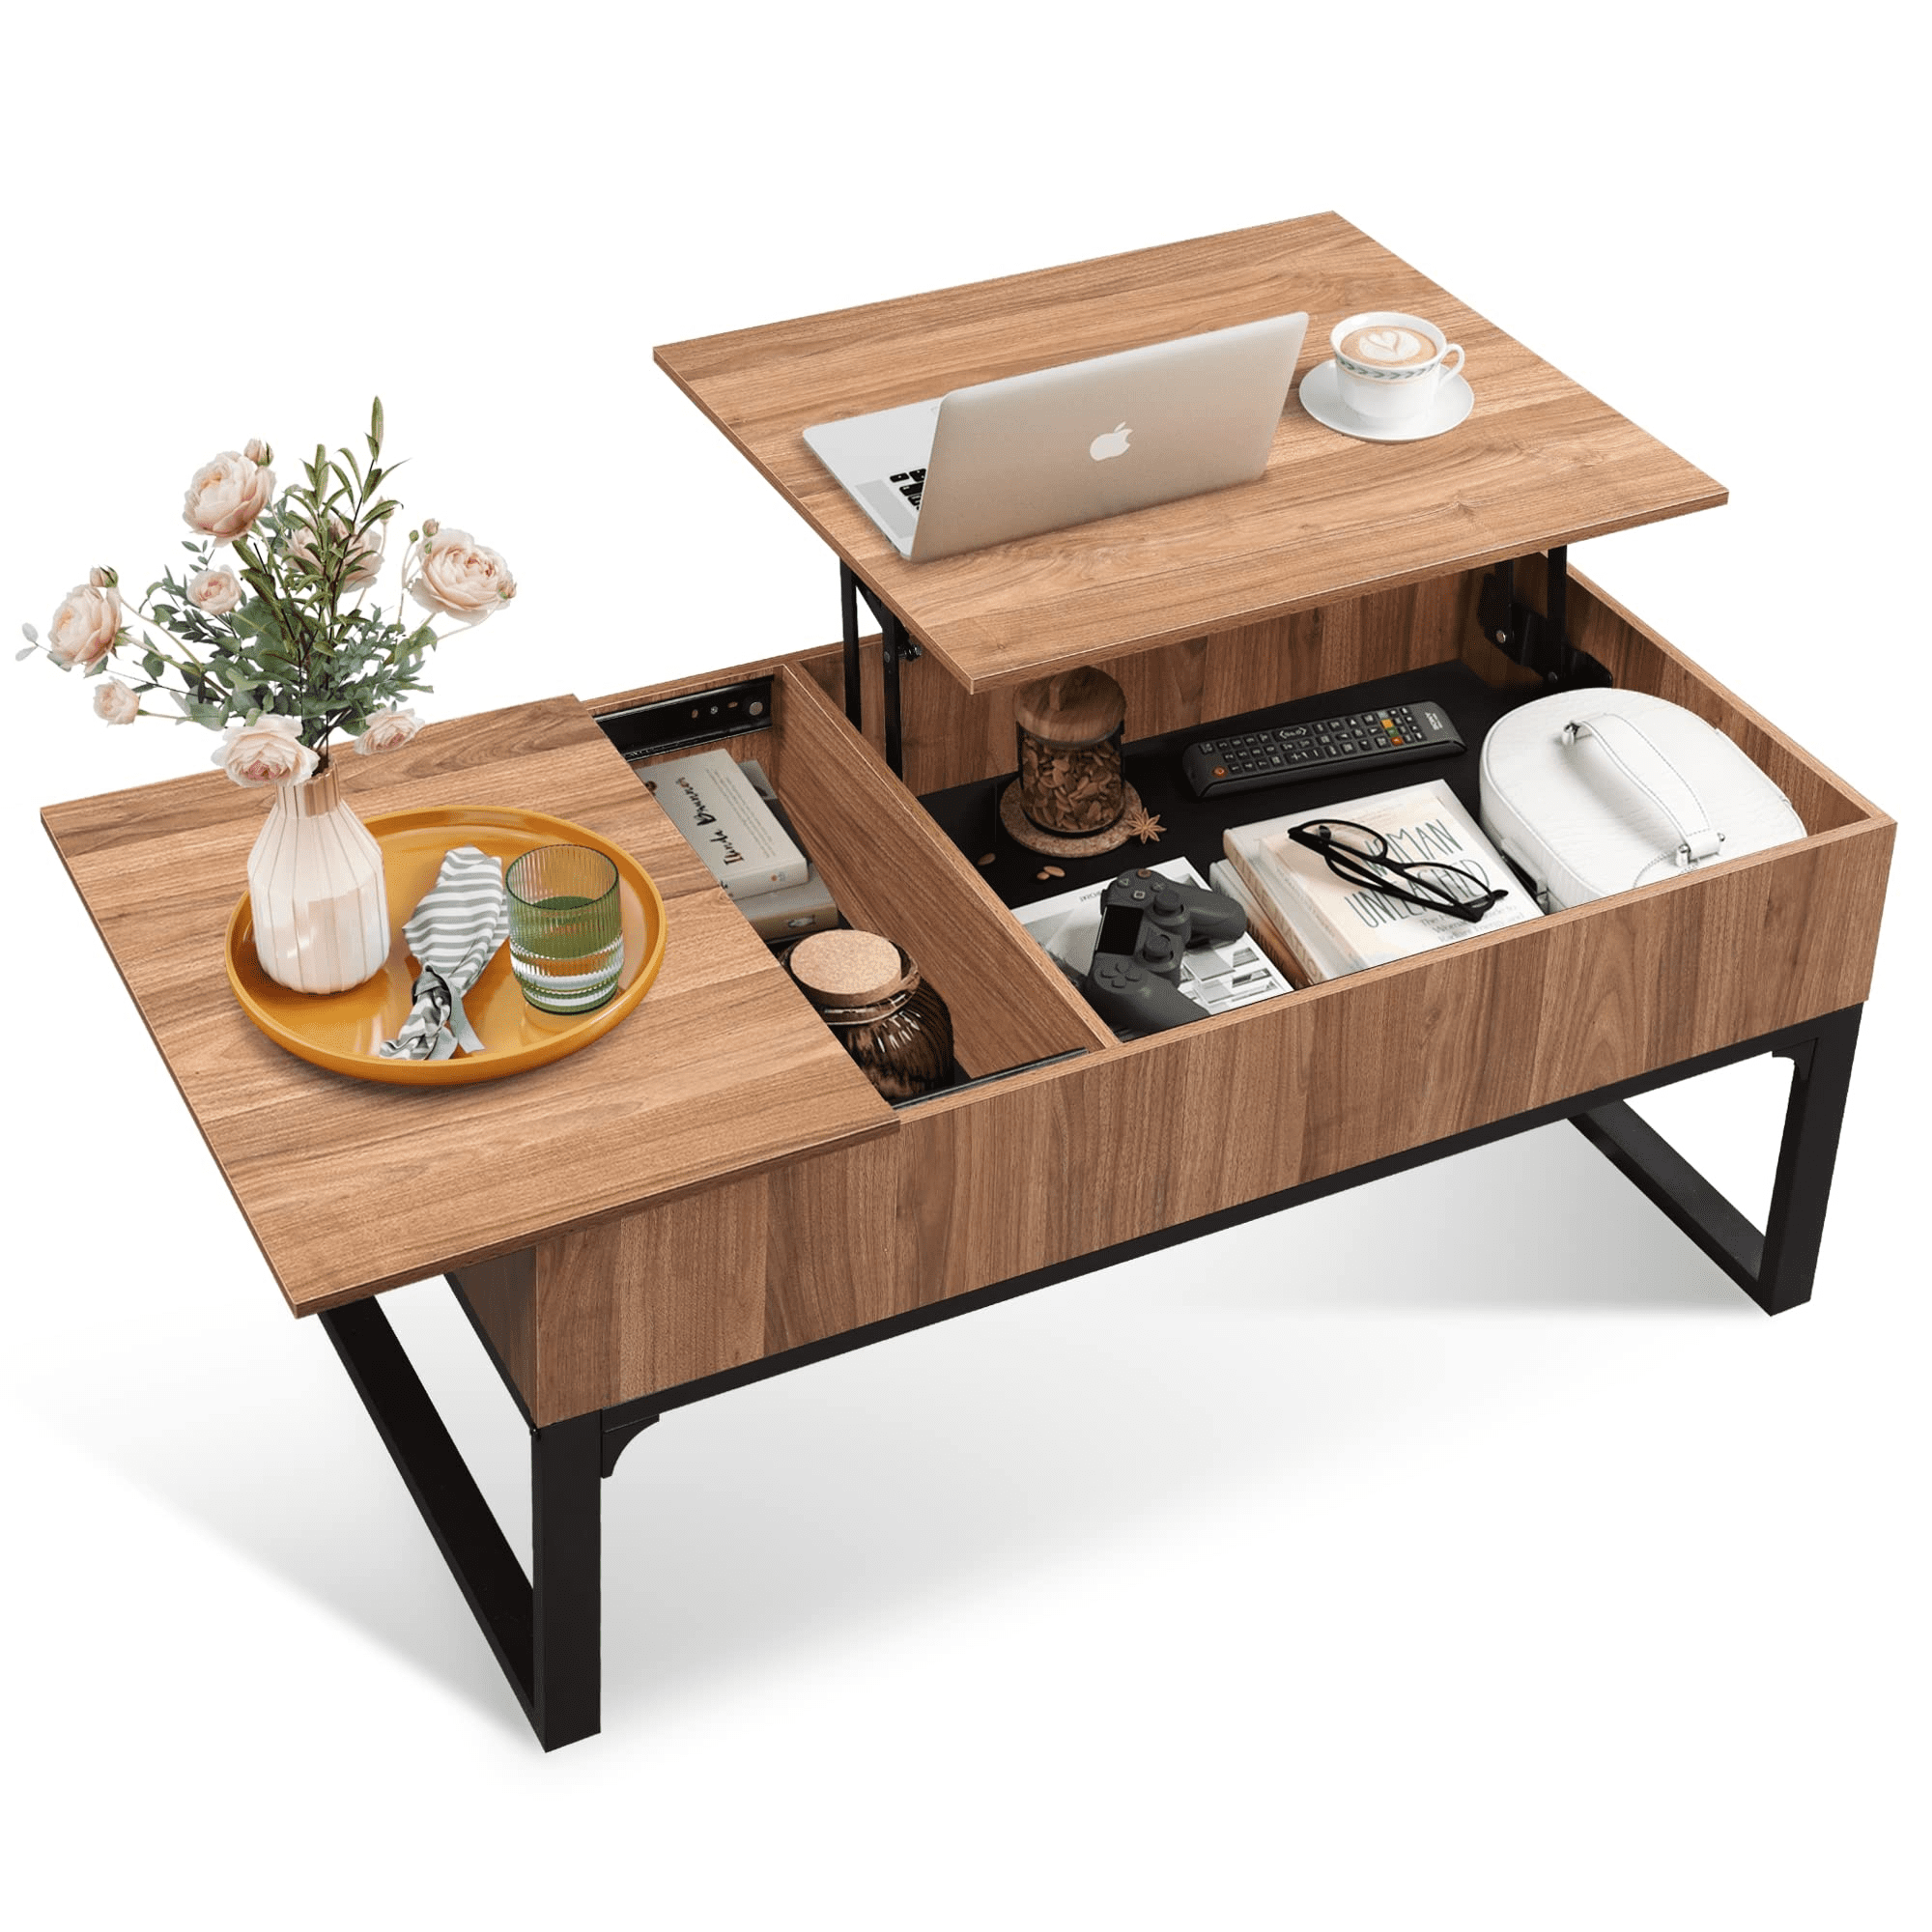 WLIVE Wood Lift Top Coffee Table with Hidden Compartment and Adjustable  Storage Shelf, Lift Tabletop Dining Table for Home Living Room, Office,  Rustic